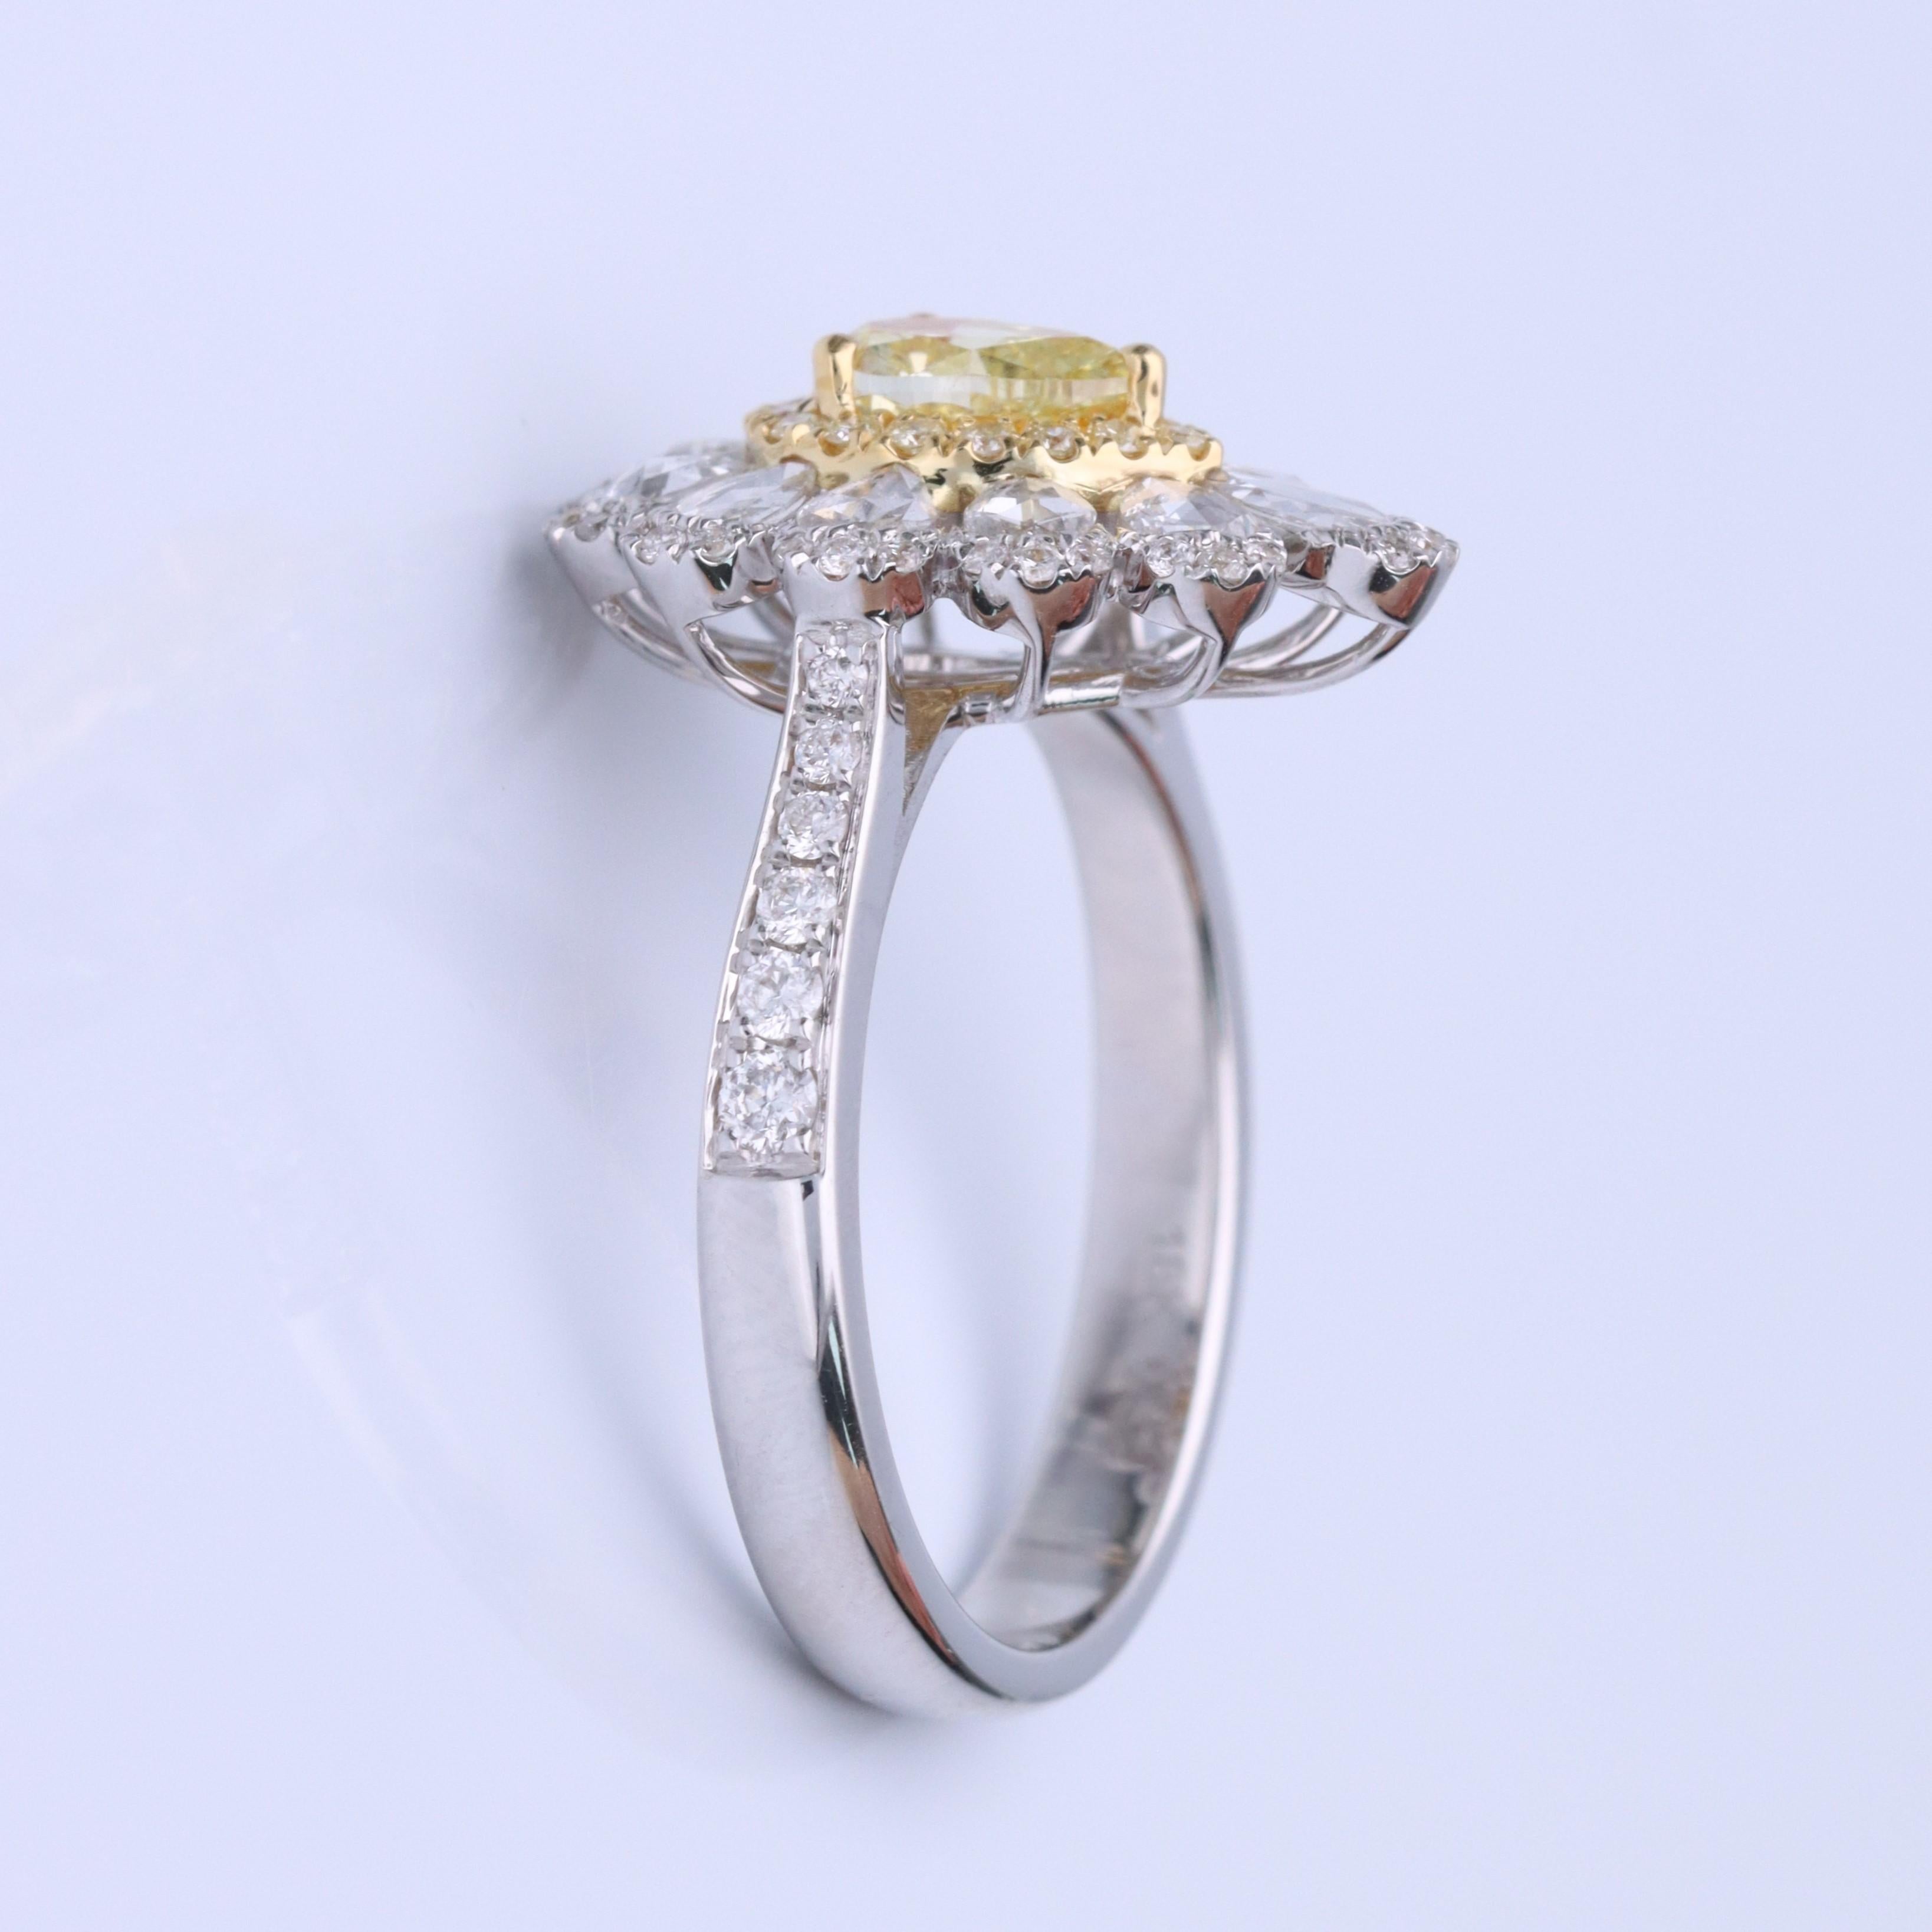 Stunning, timeless and classy eternity Unique Ring. Decorate yourself in luxury with this Gin & Grace Ring. The 18K Two Tone Gold jewelry boasts with Pear-cut 1 pcs  0.56 carat, Round-cut 16 pcs 0.10 carat Yellow Diamond and Natural Round-cut white